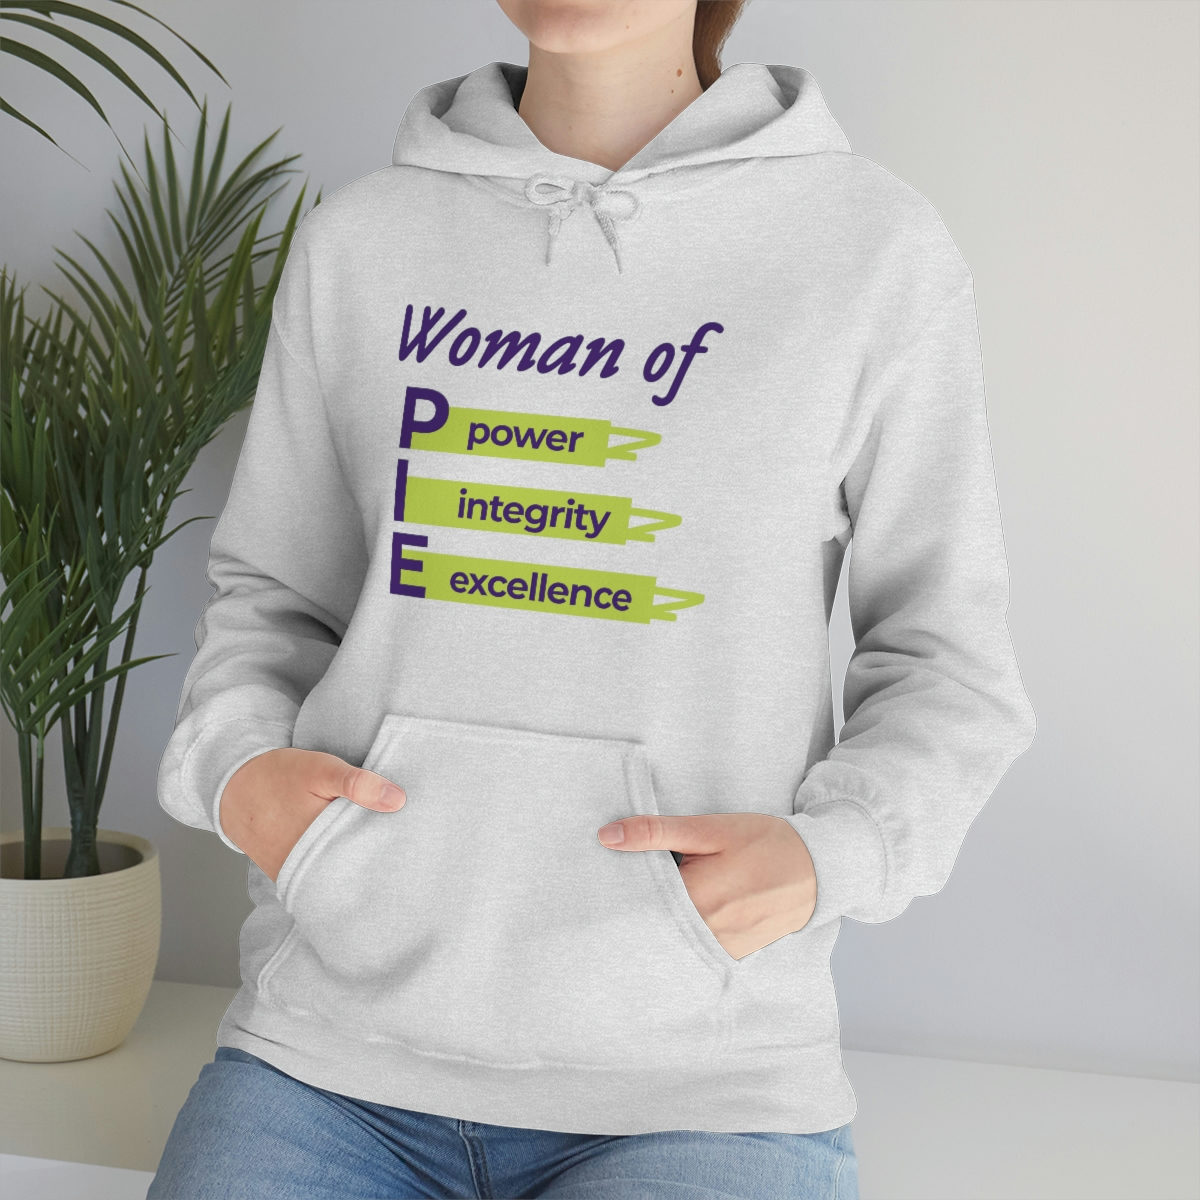 Why You Should Get IWI Hoodies